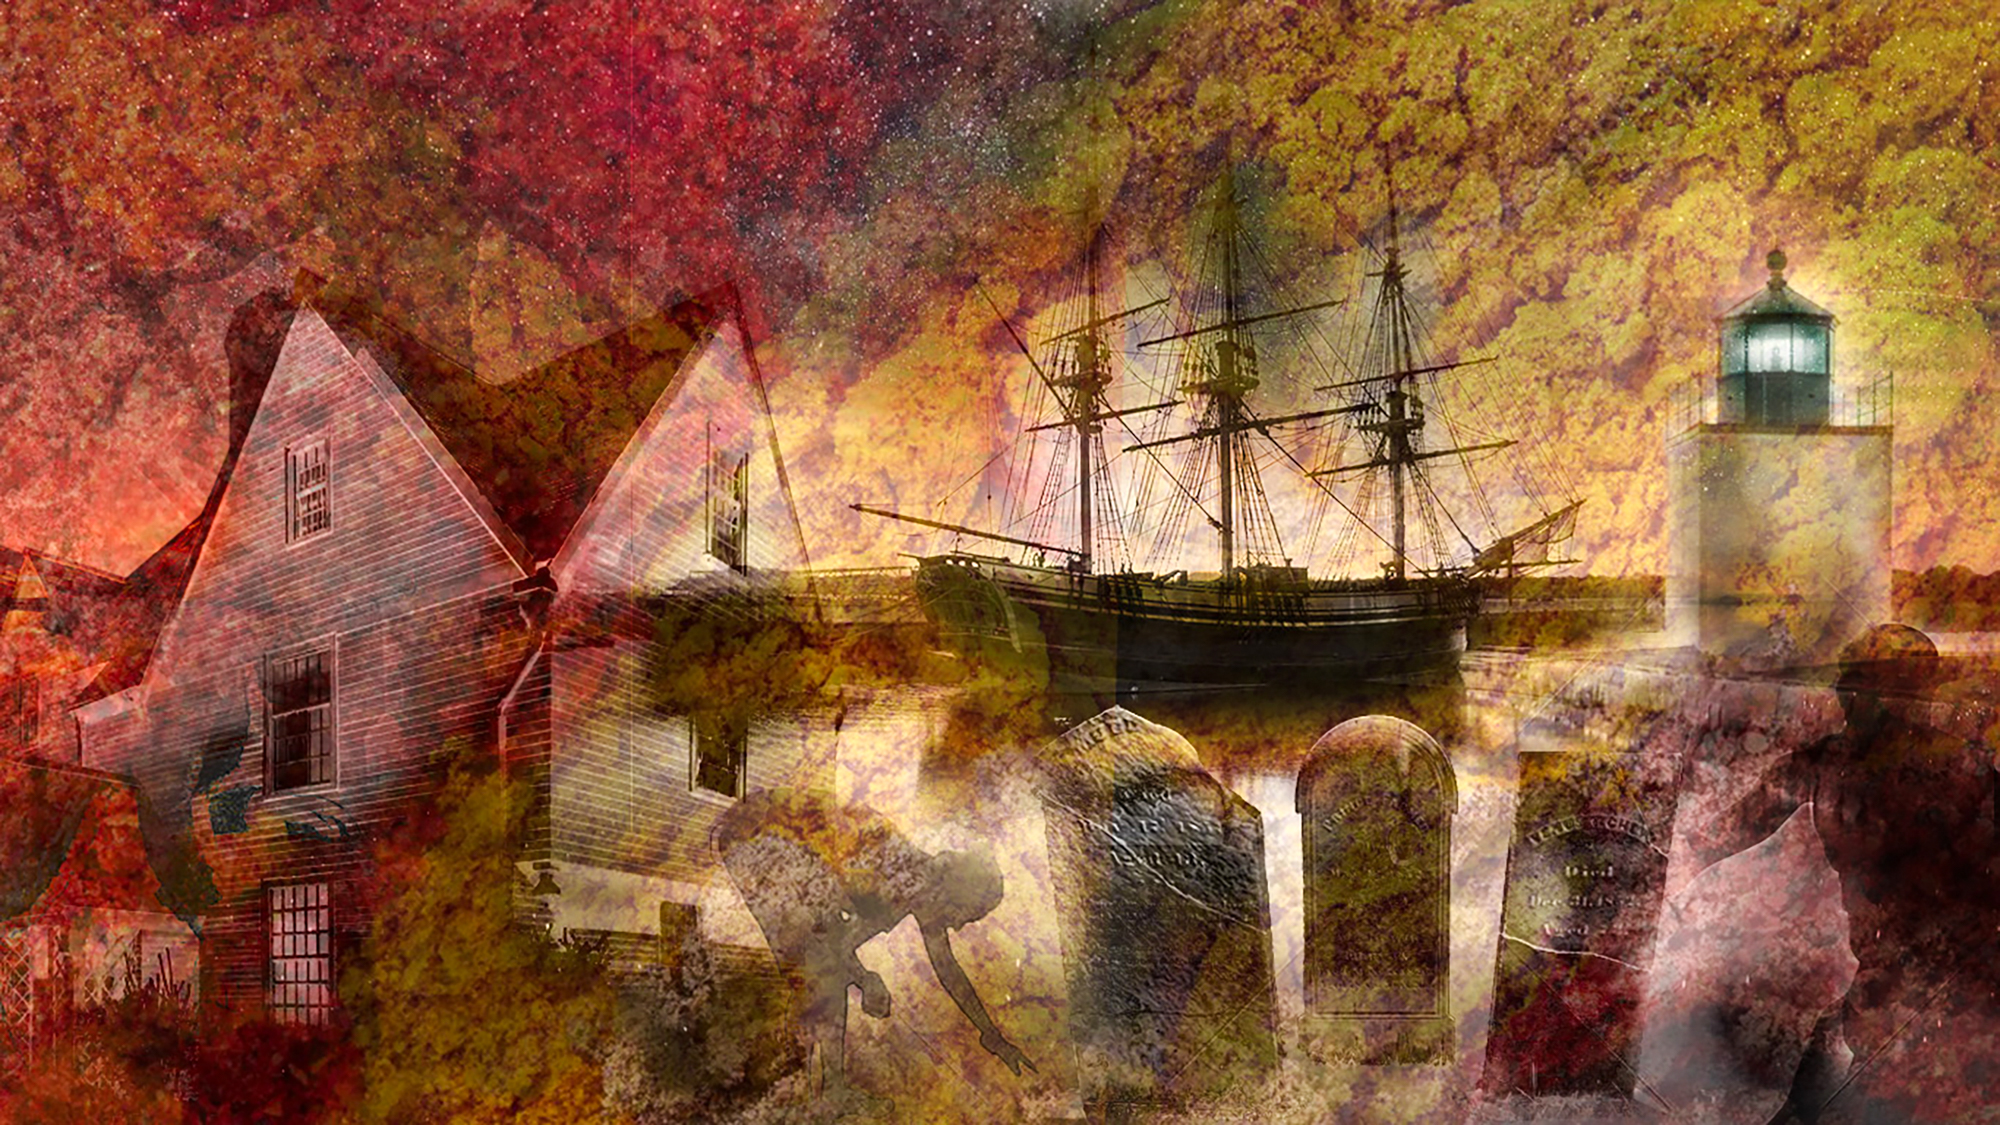 Digital artwork of layered images, including a ship, a lighthouse, a wooden house, grave stones, and silhouettes.